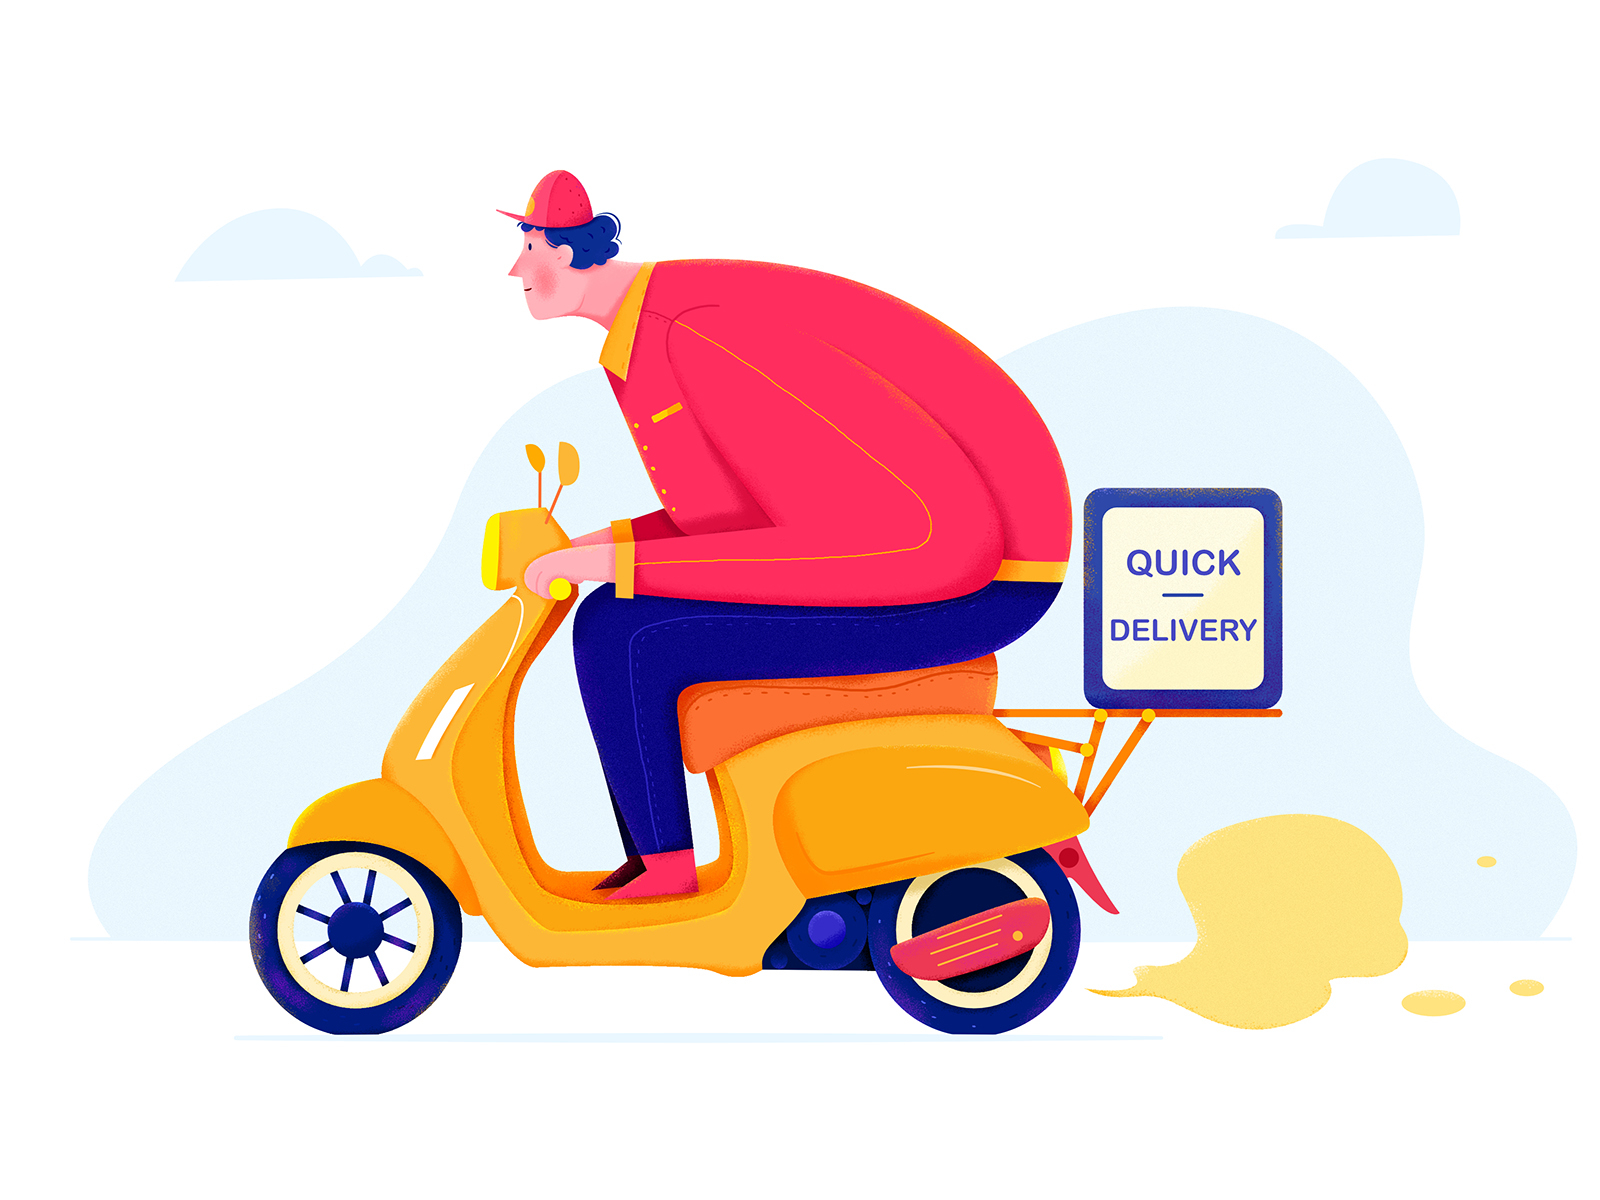 Dribbble - food_delivery.jpg by Uran Duo